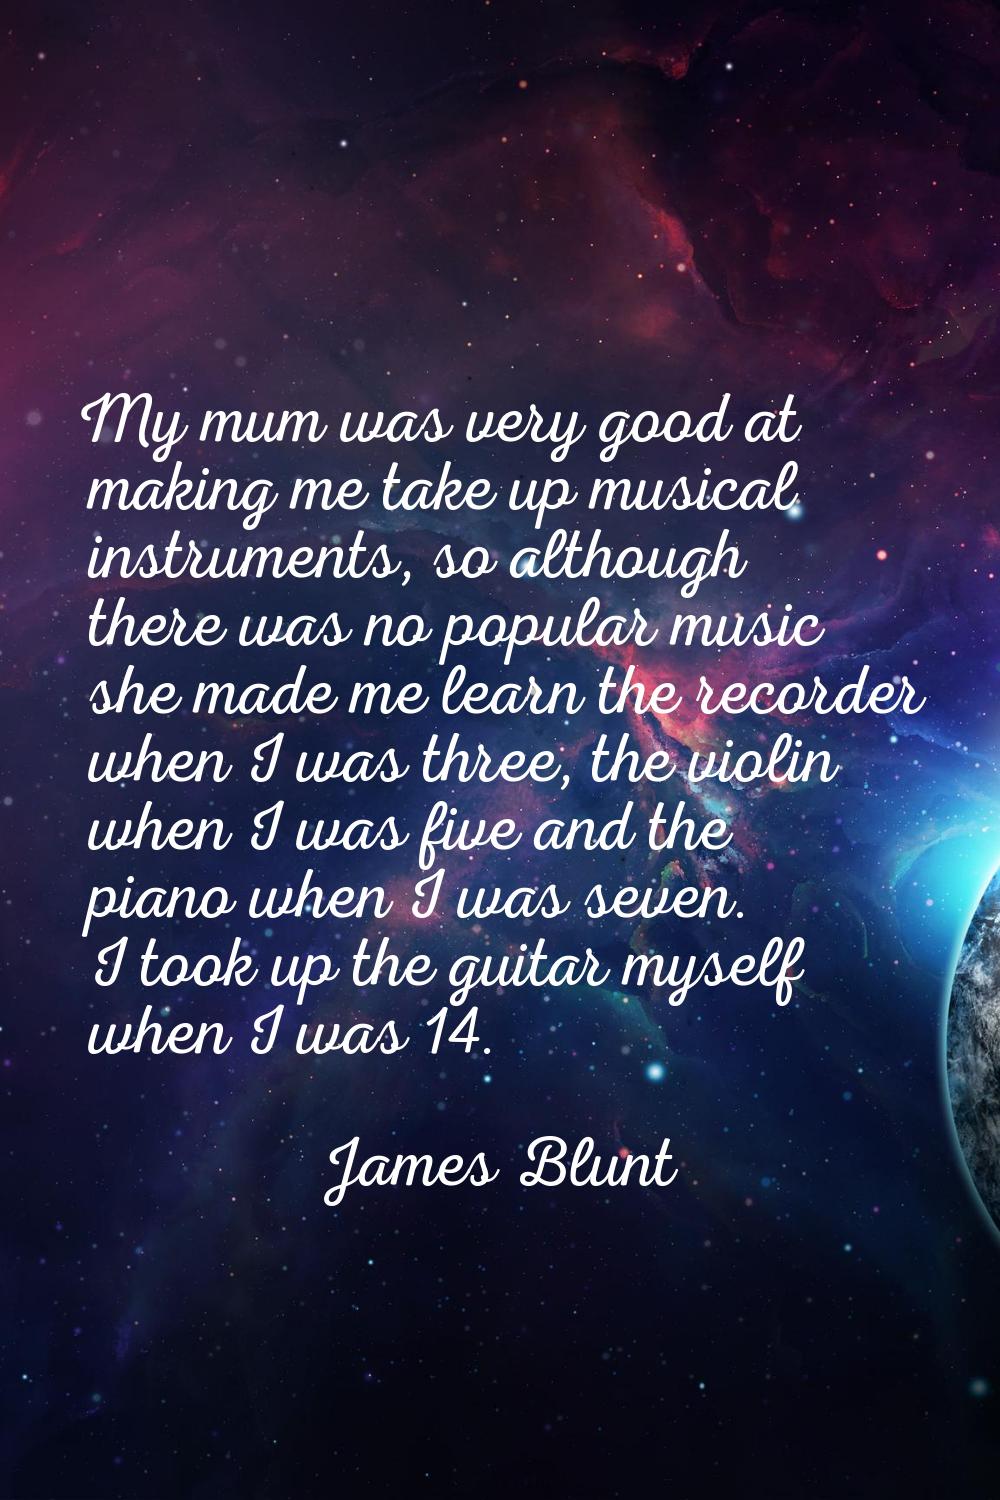 My mum was very good at making me take up musical instruments, so although there was no popular mus